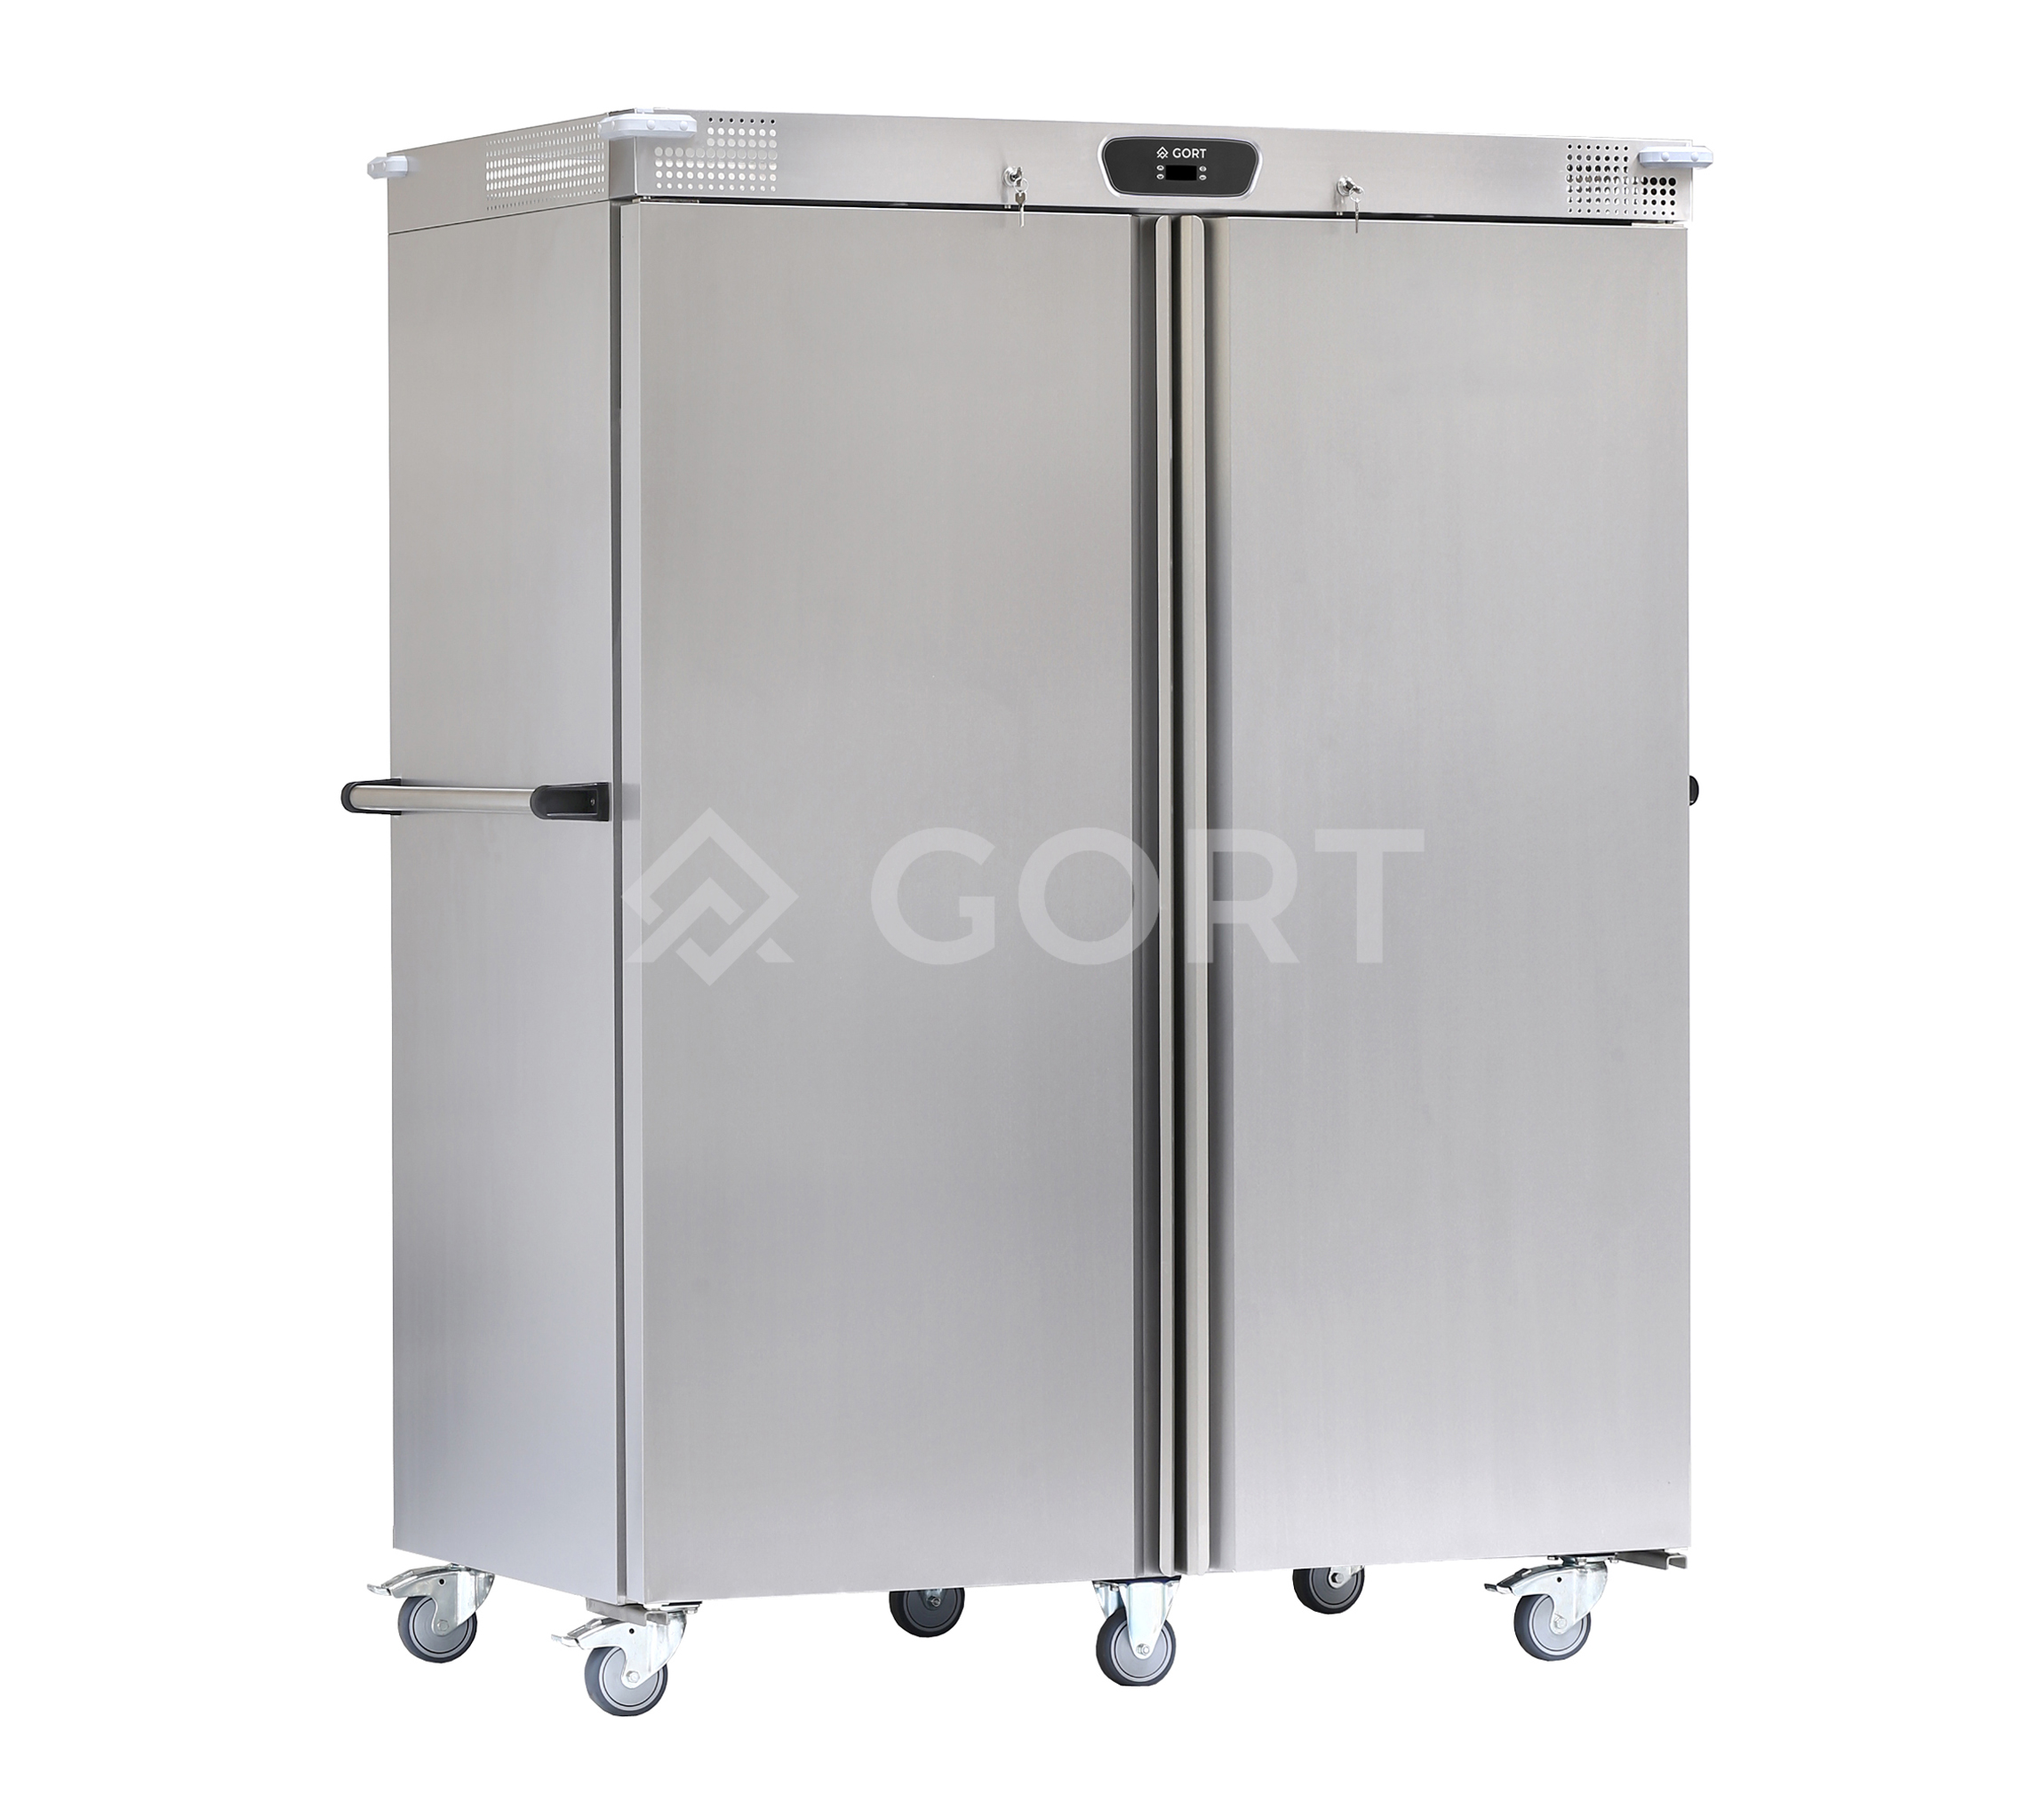 Banquet refrigerated cabinet, double